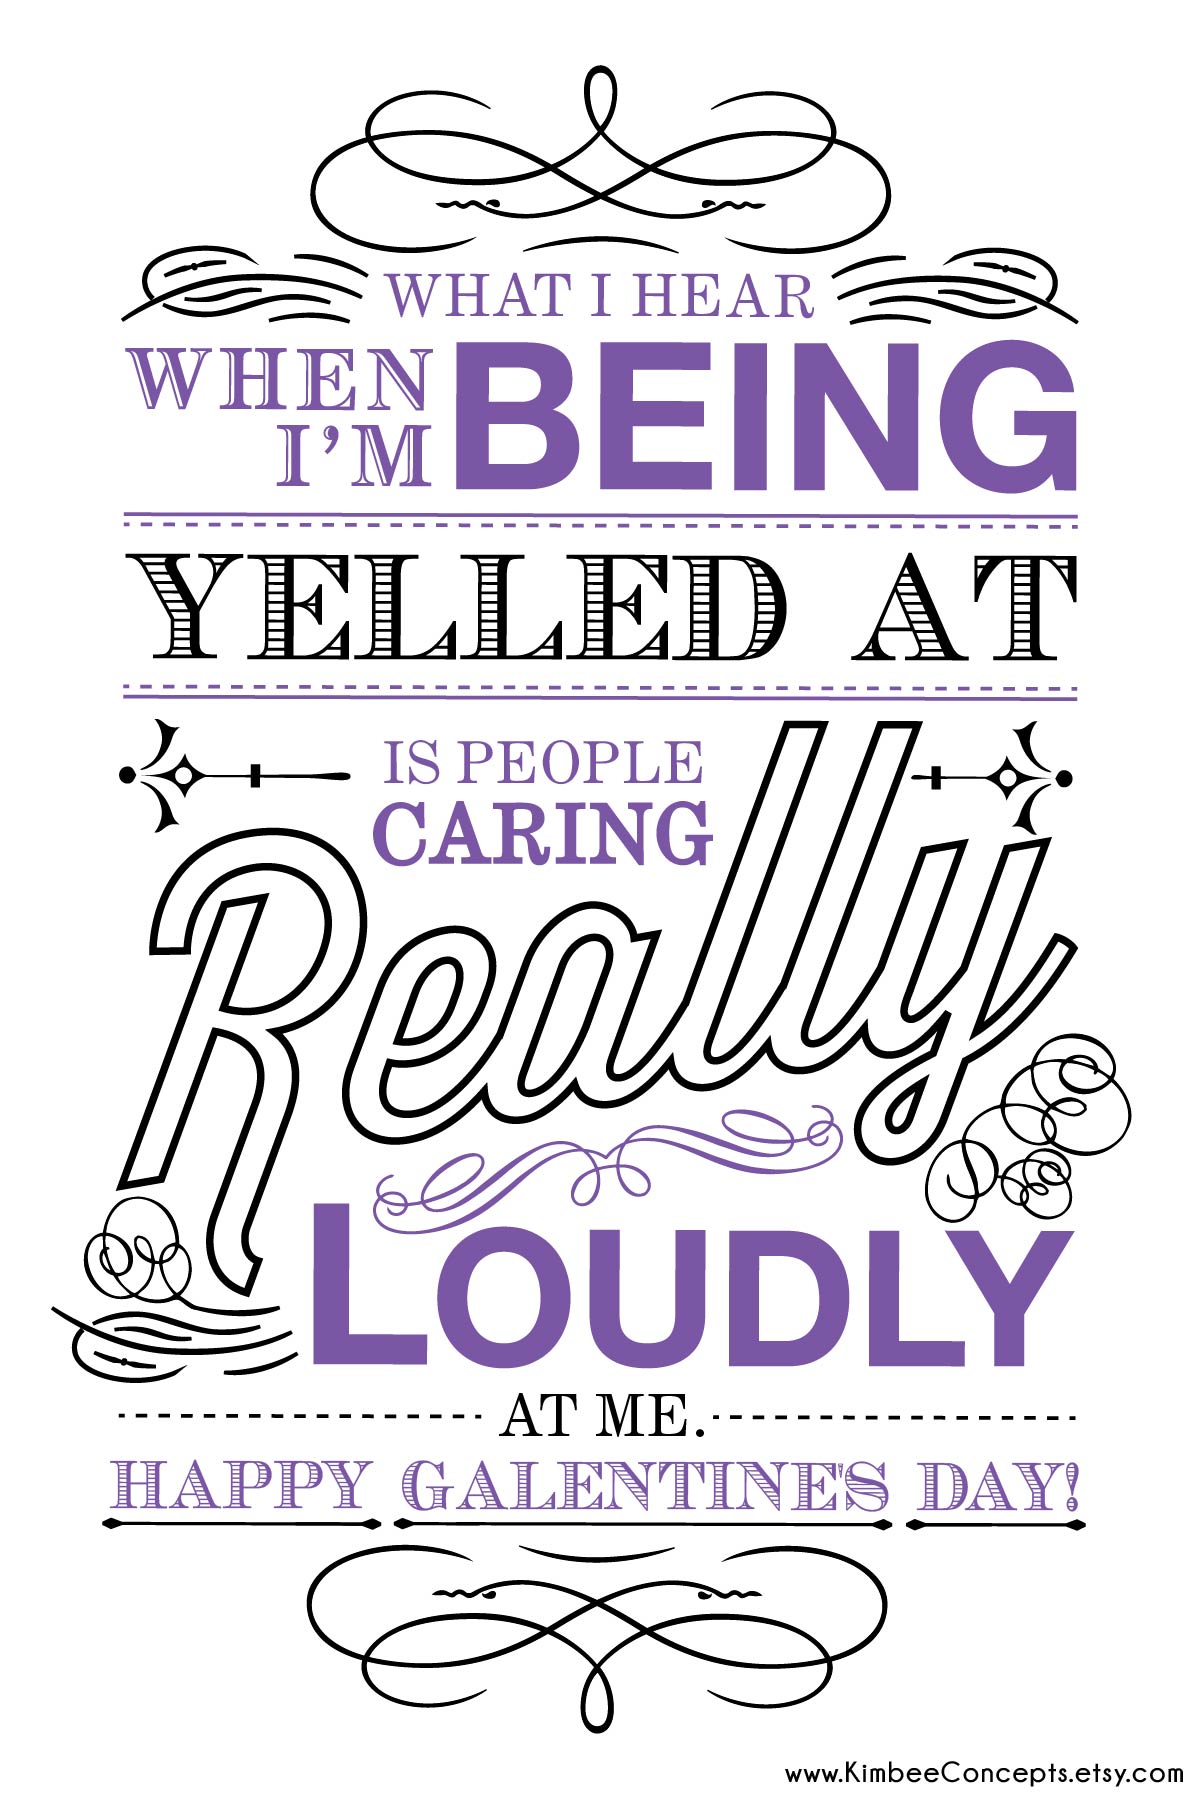 Free Galentines Day Card Caring Loudly